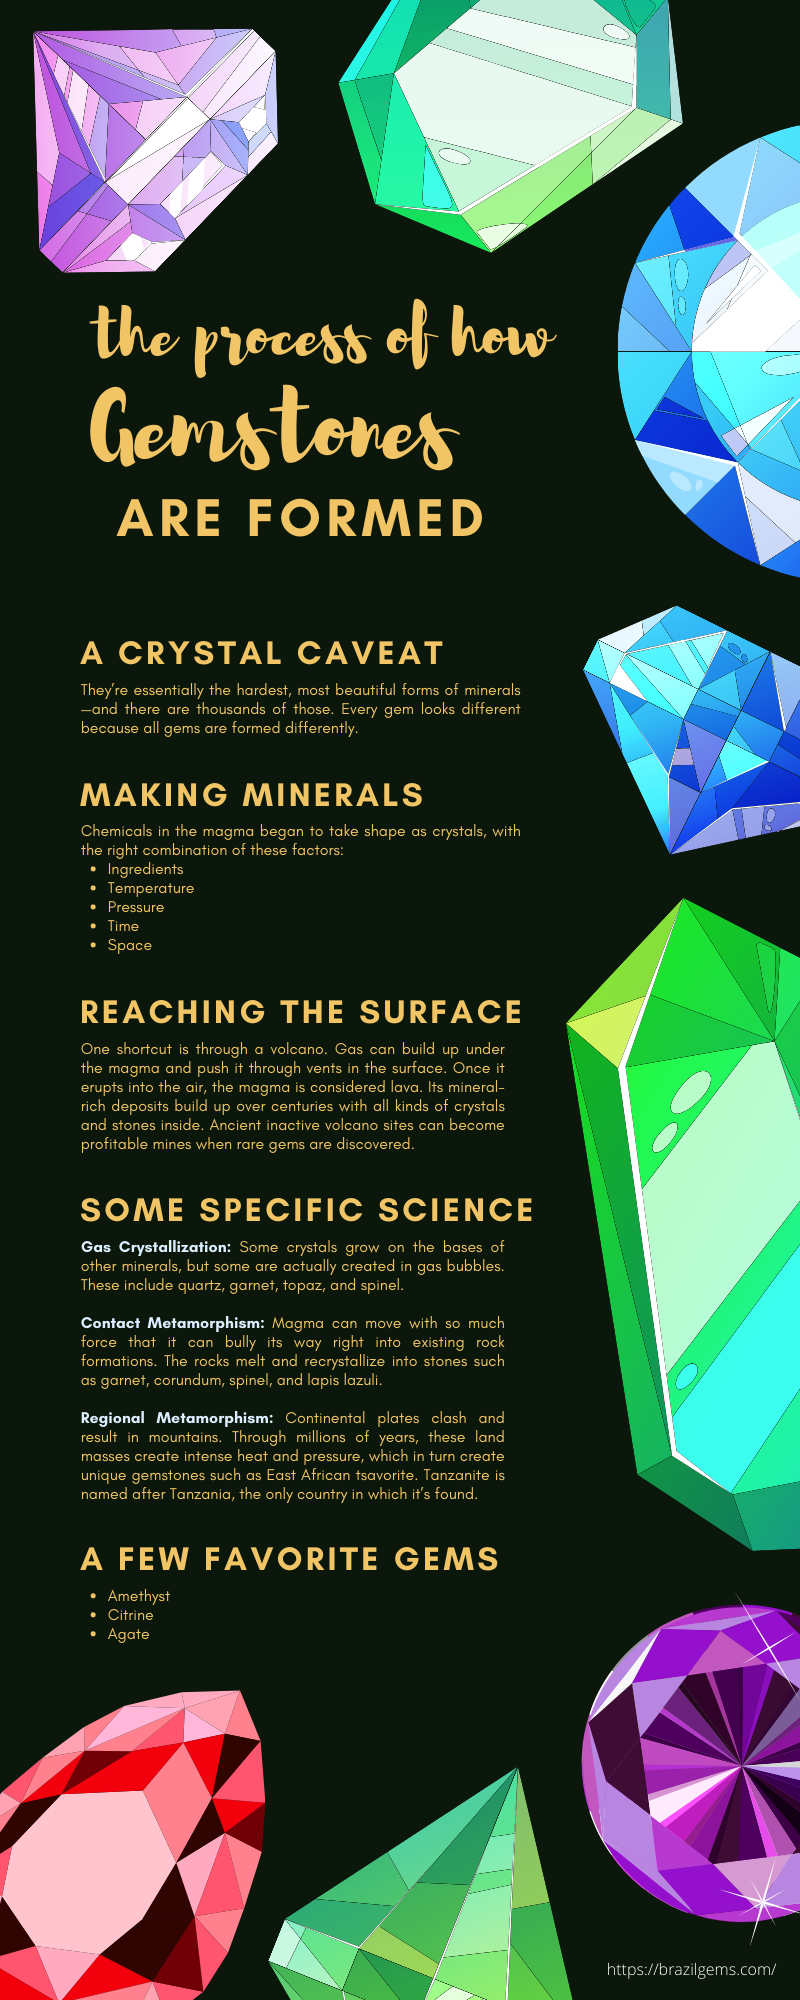 The Natural Process of How Gemstones Are Formed